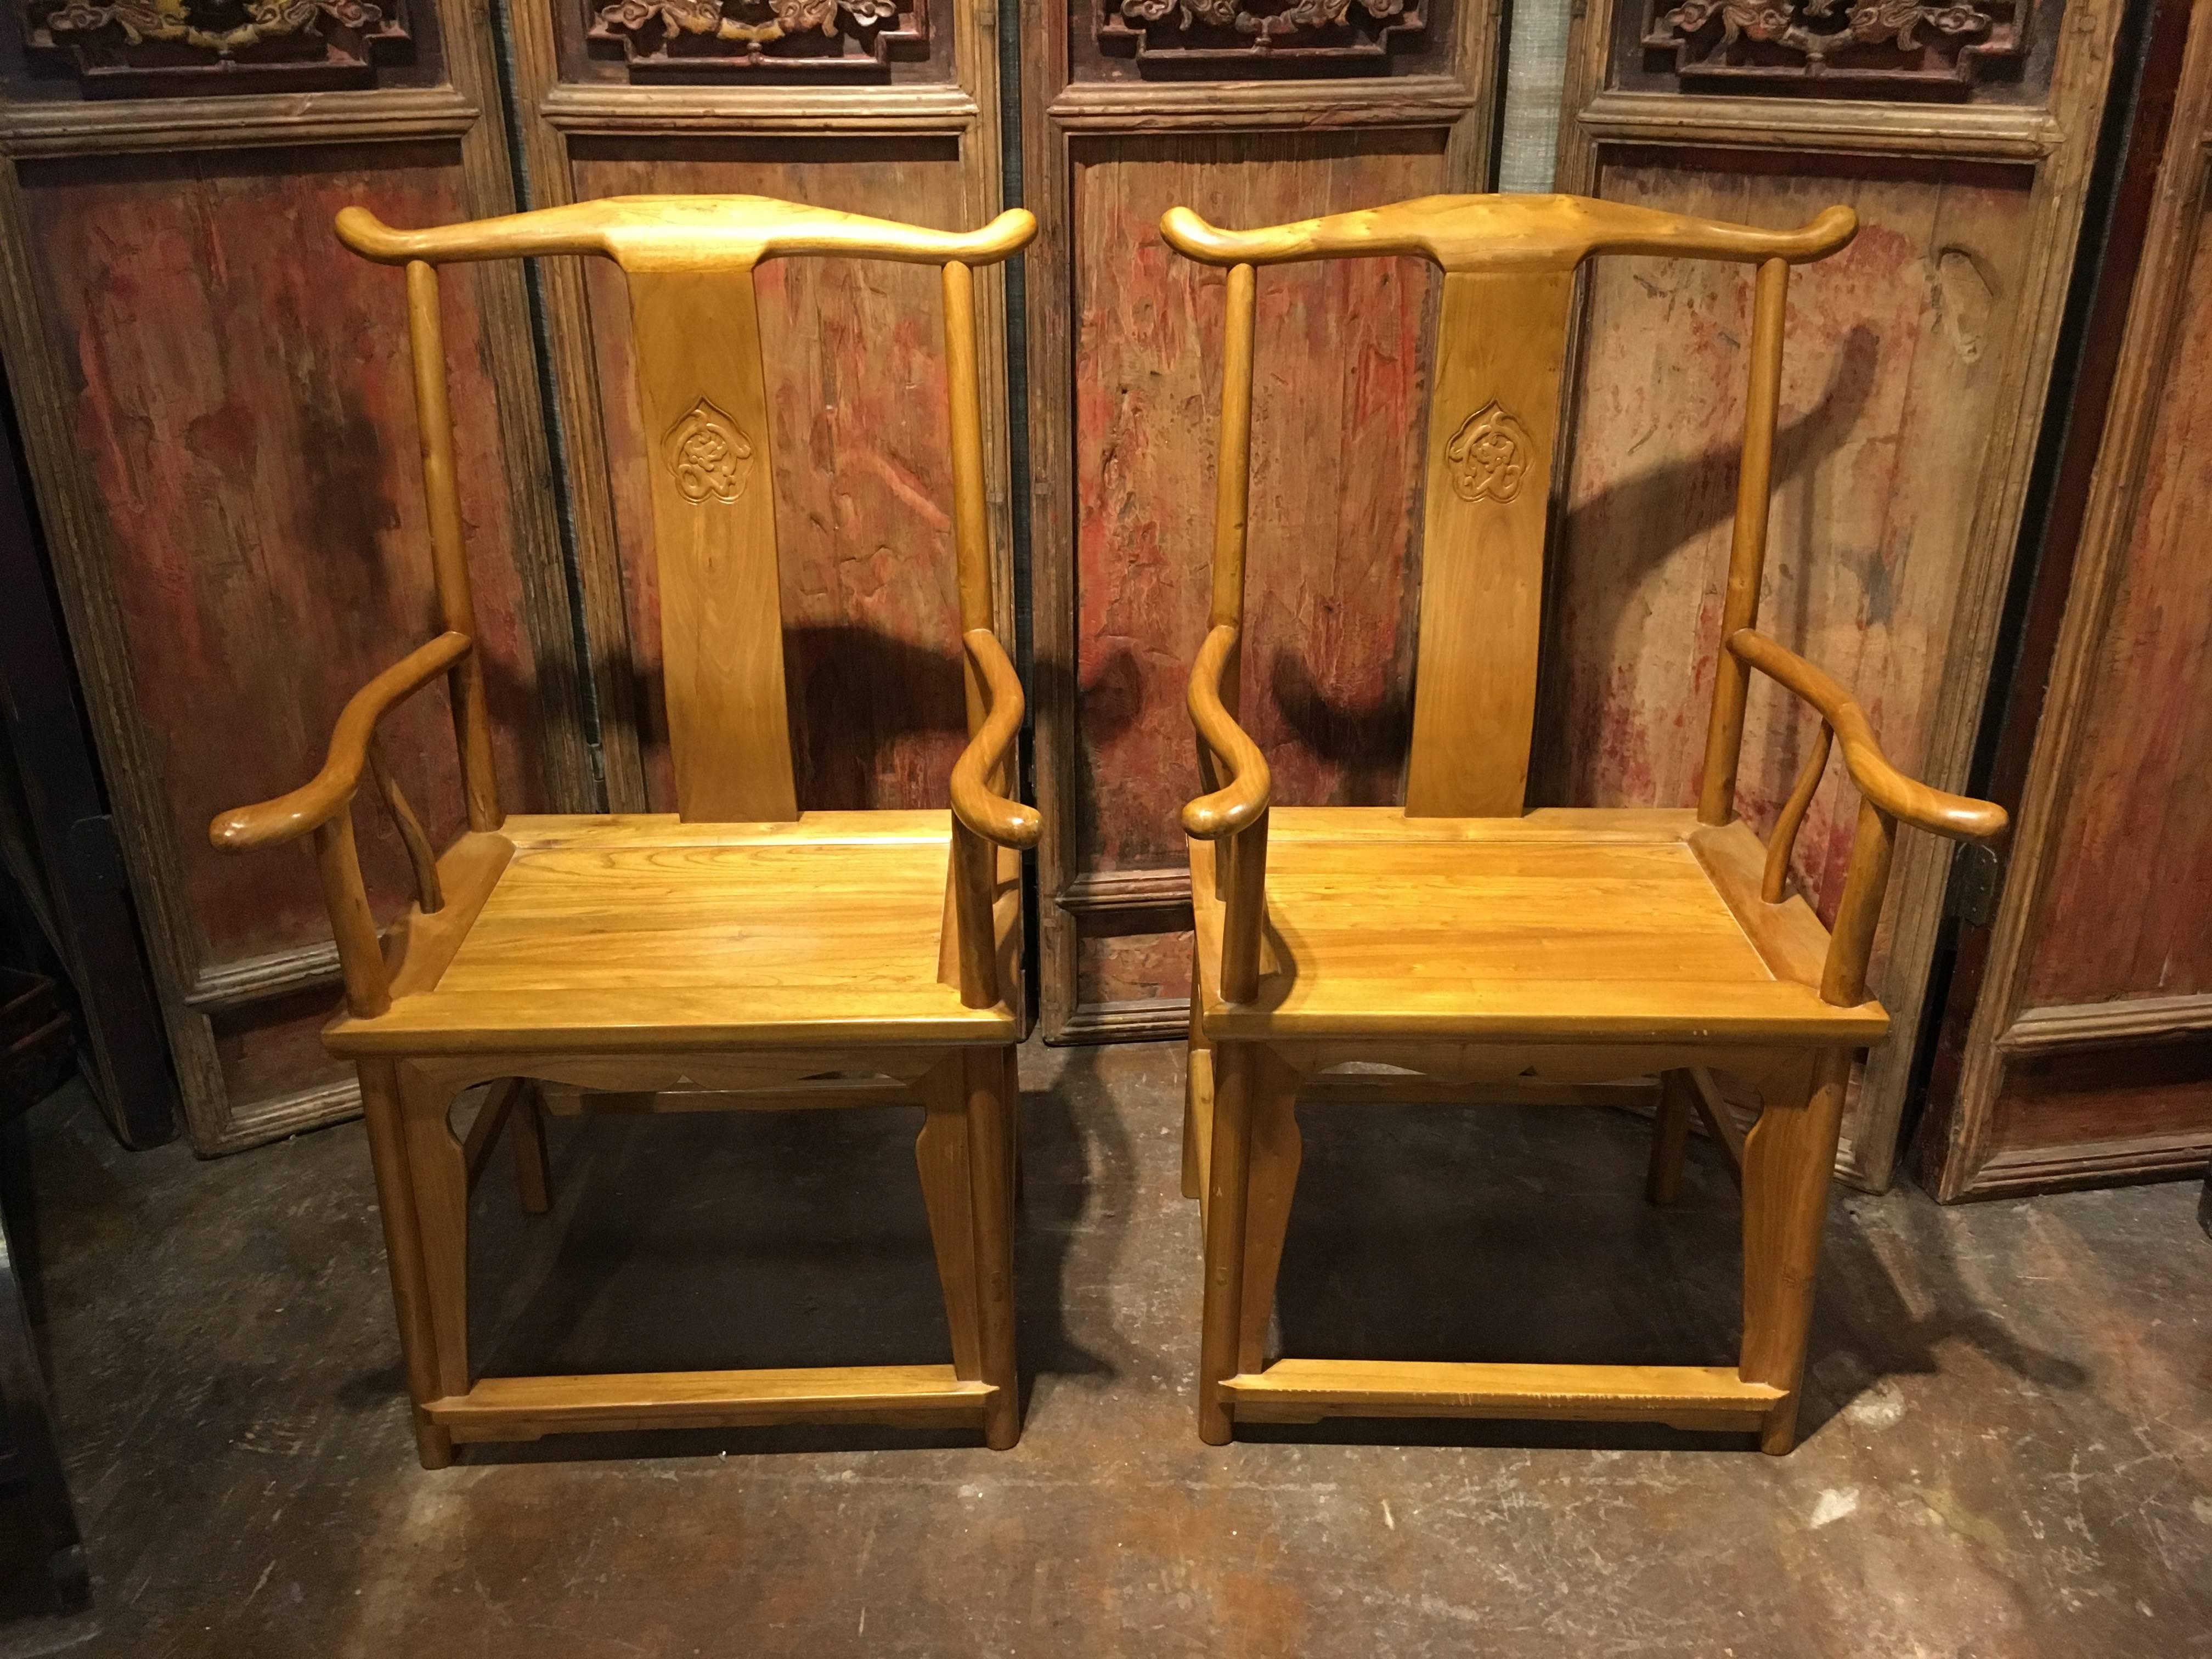 A stunning pair of 20th century Chinese yoke back armchairs crafted of cypress, baimu. 
The chairs of typical style and construction, and known as official's hat chairs or yoke back chairs, because of the shape of the crest rail. The chairs solidly